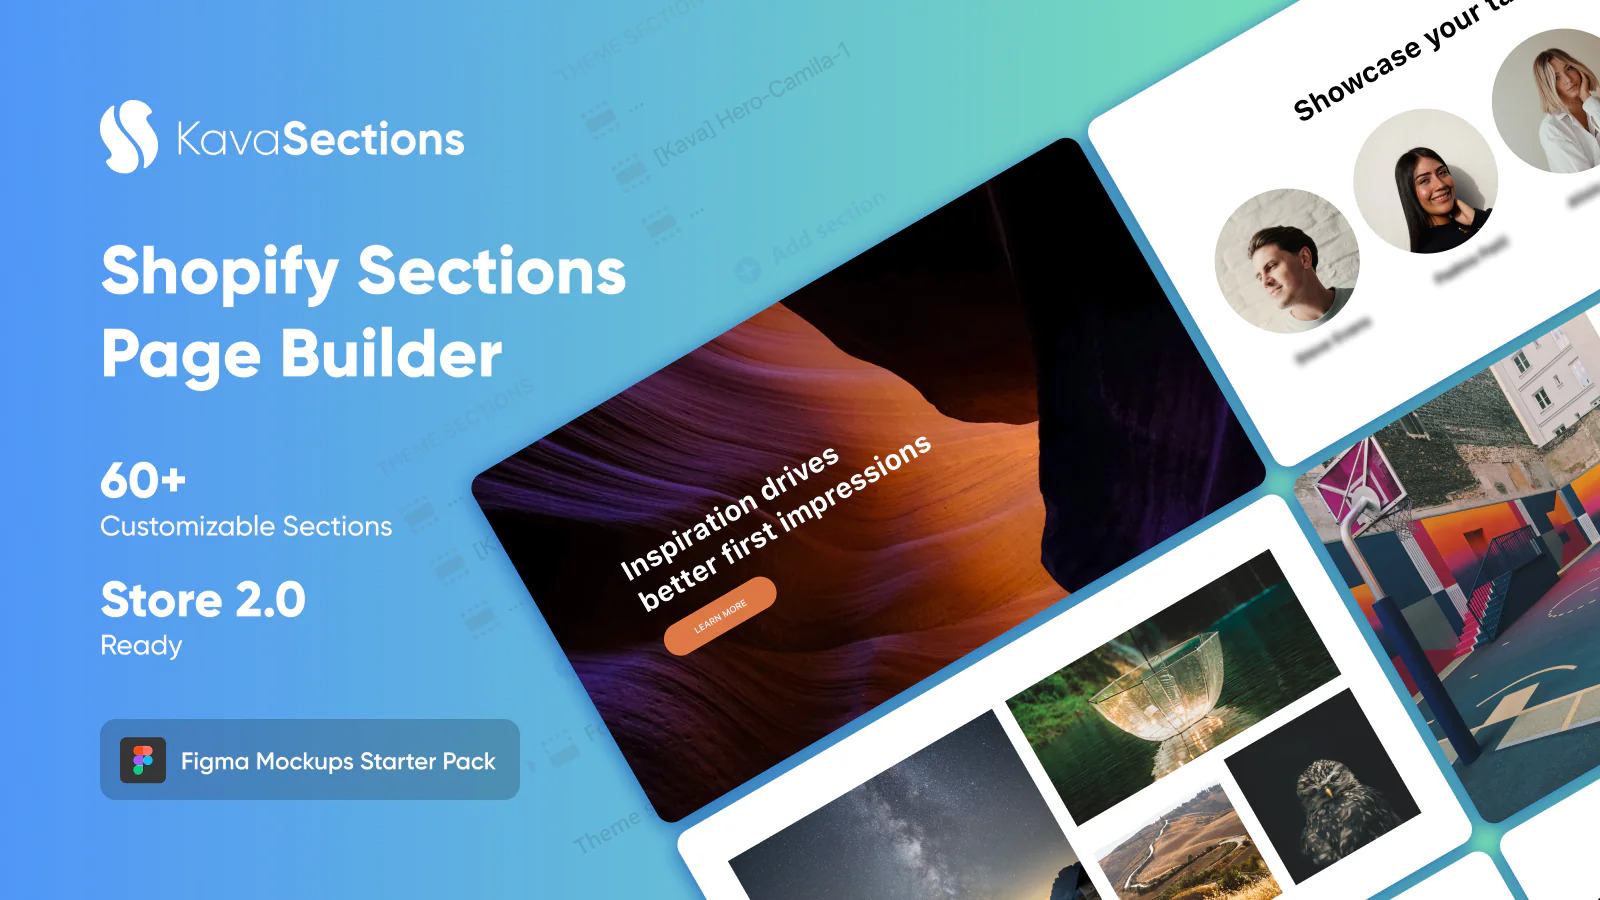 Kava Sections shopify page builder